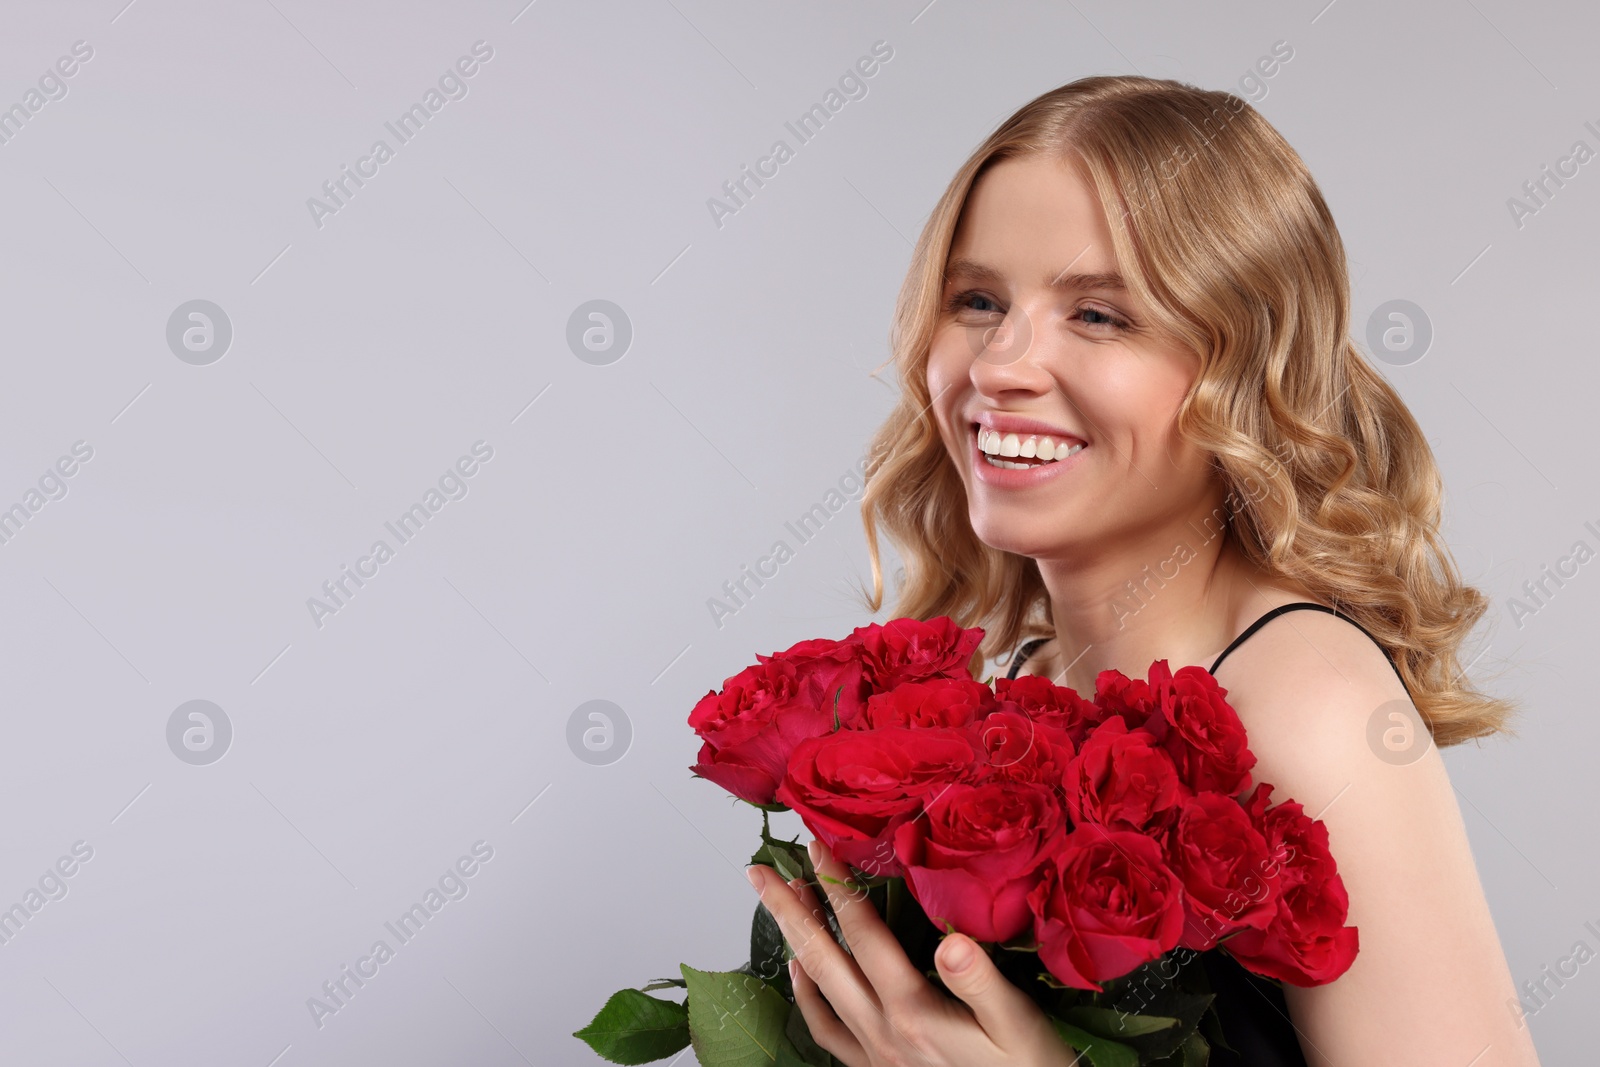 Photo of Beautiful woman with blonde hair holding bouquet of red roses on light grey background. Space for text